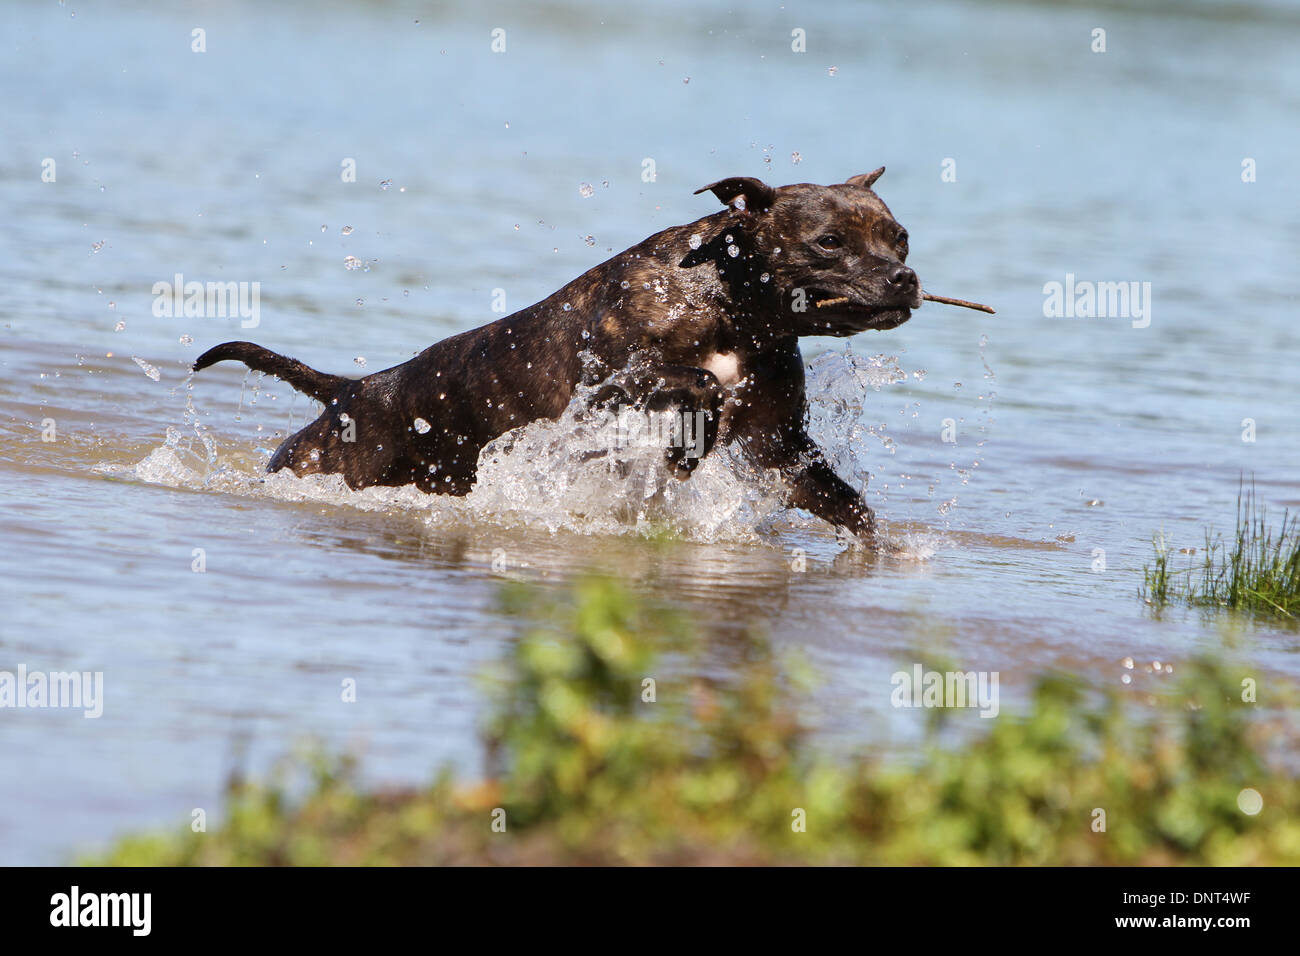 dog Staffordshire Bull Terrier / Staffie   adult running with a stick in its mouth in a lake Stock Photo